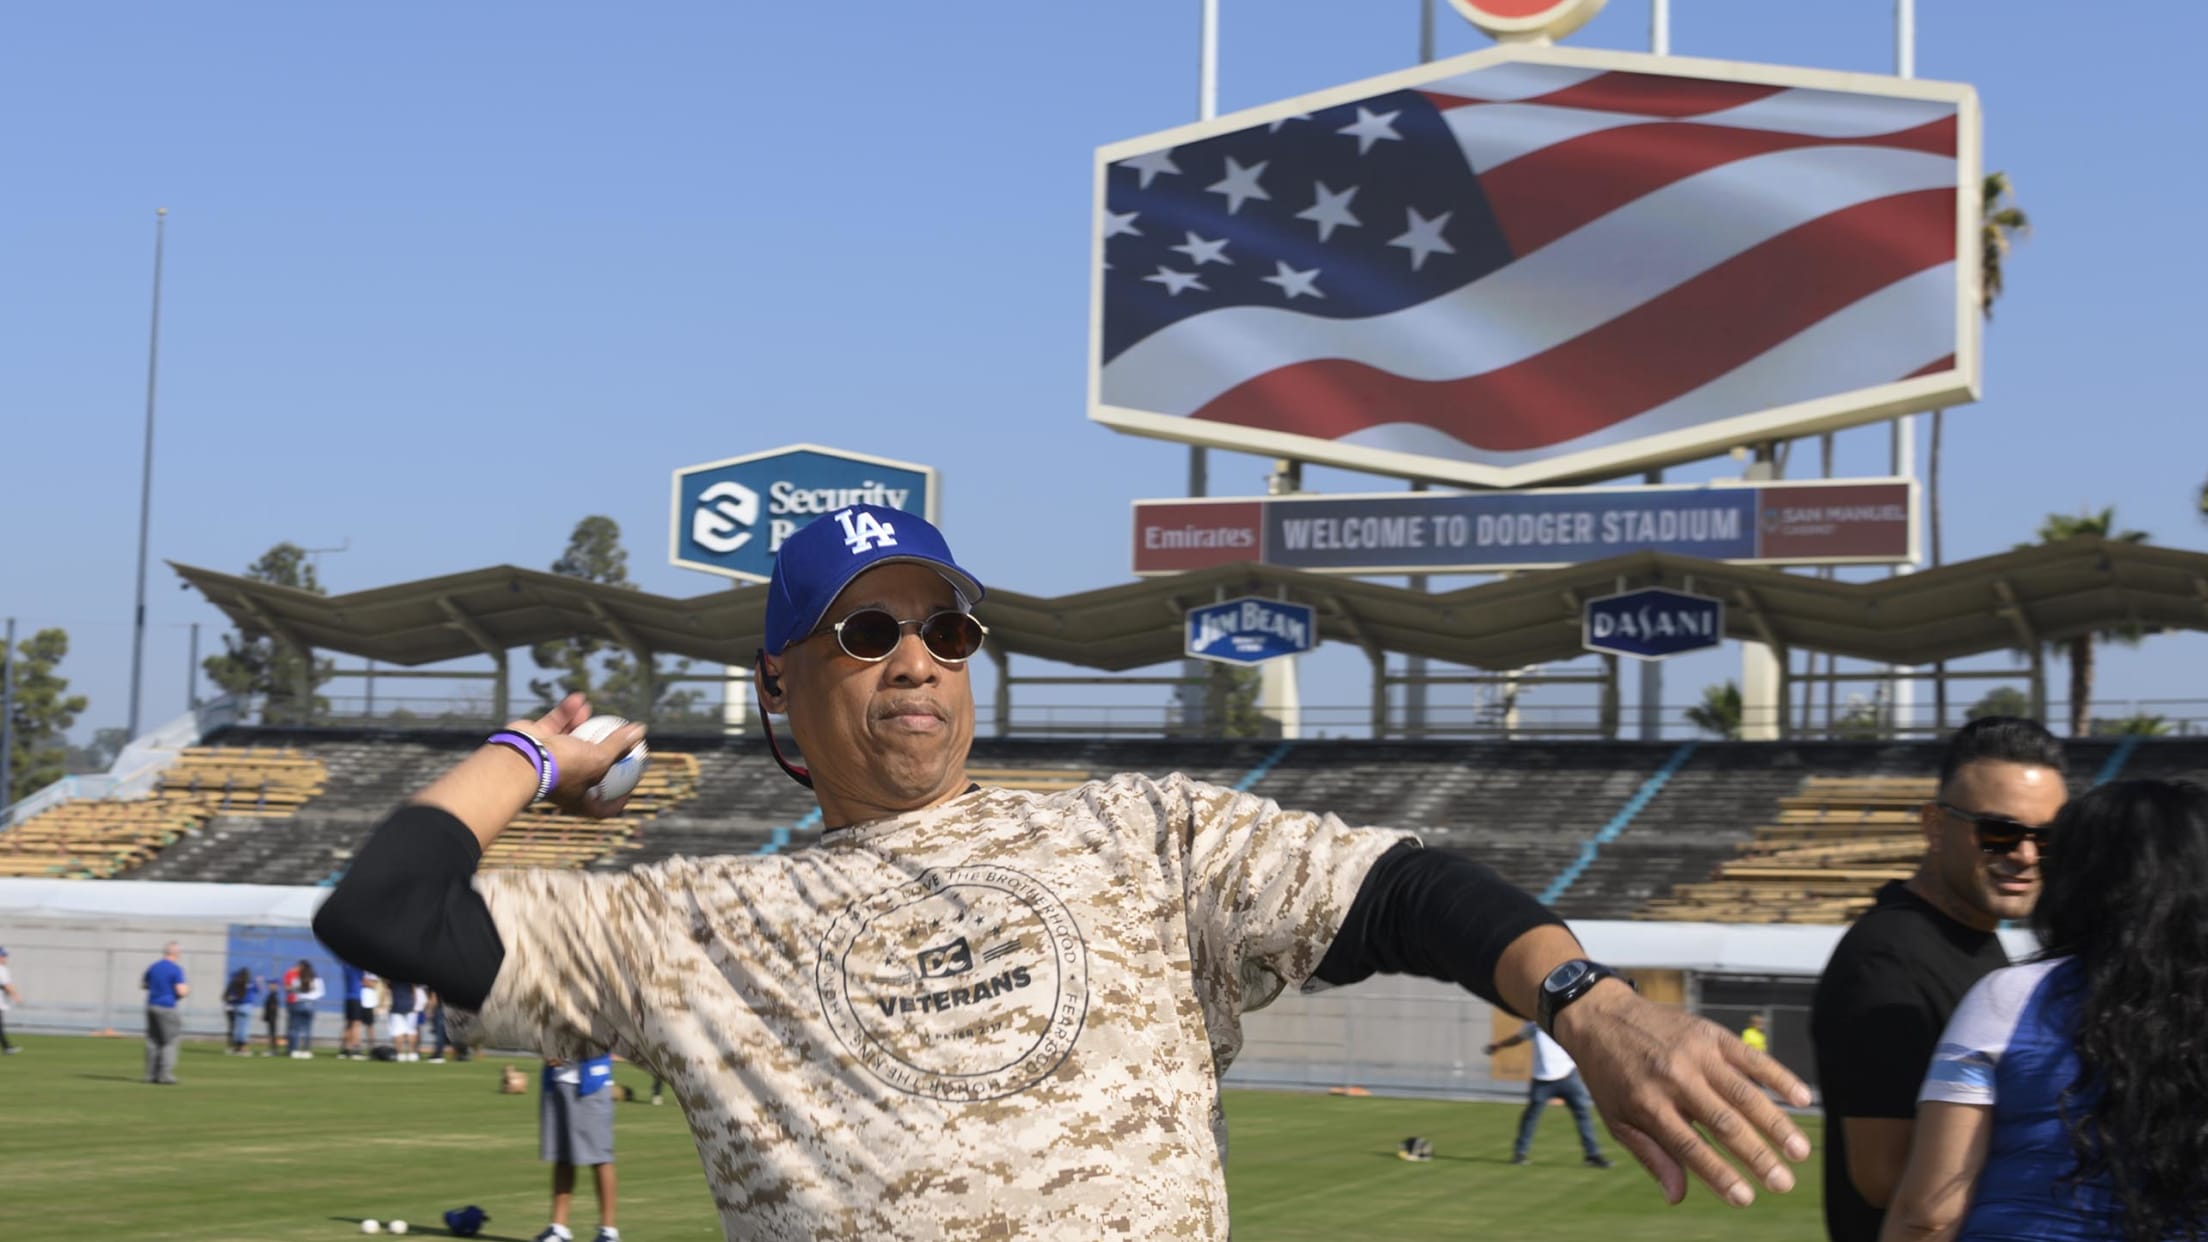 Dodgers honor veterans and their families